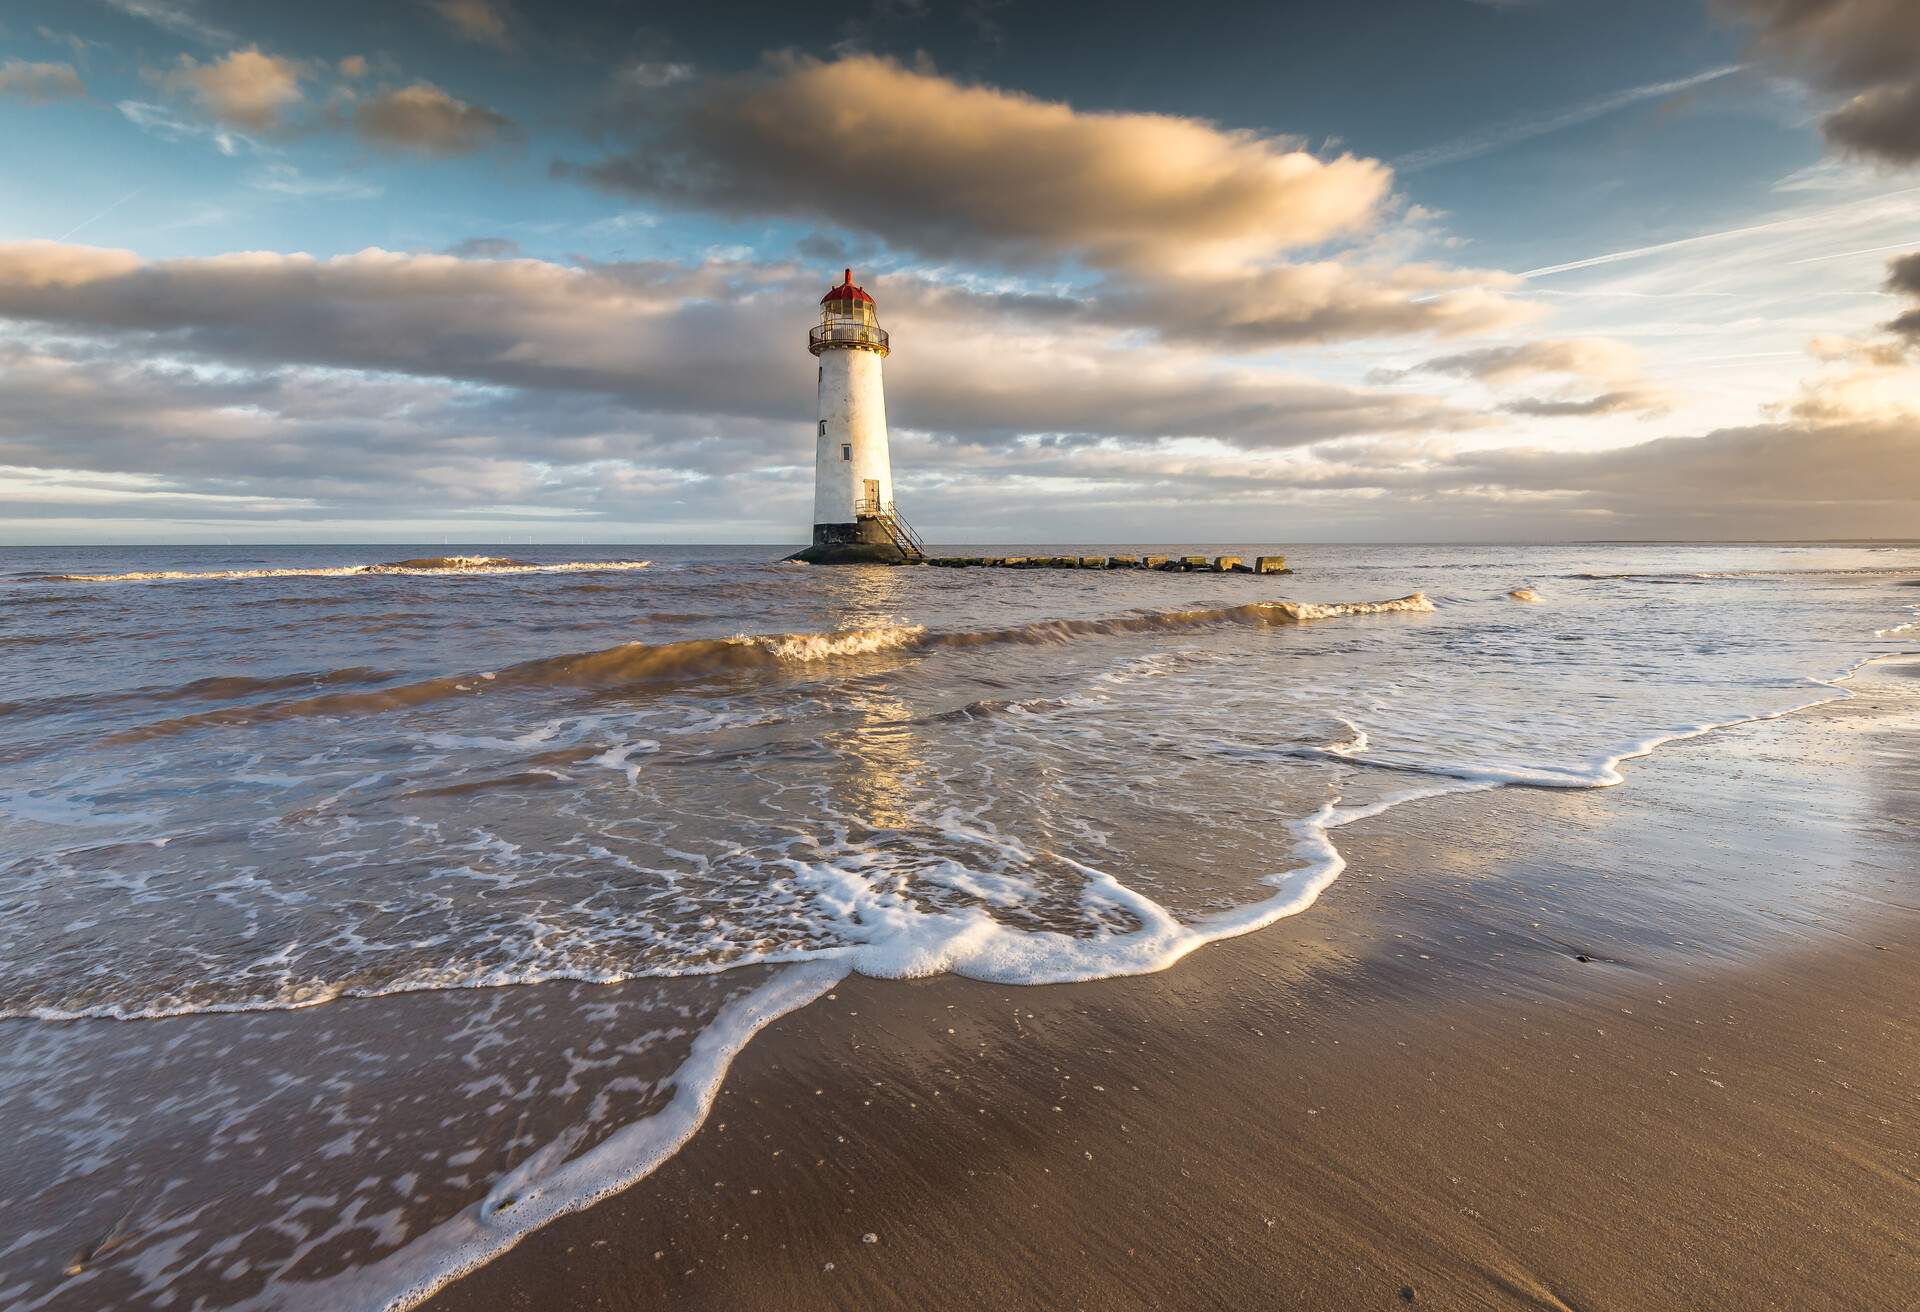 DEST_UK_WALES_Talacre_beach_GettyImages-1183714694